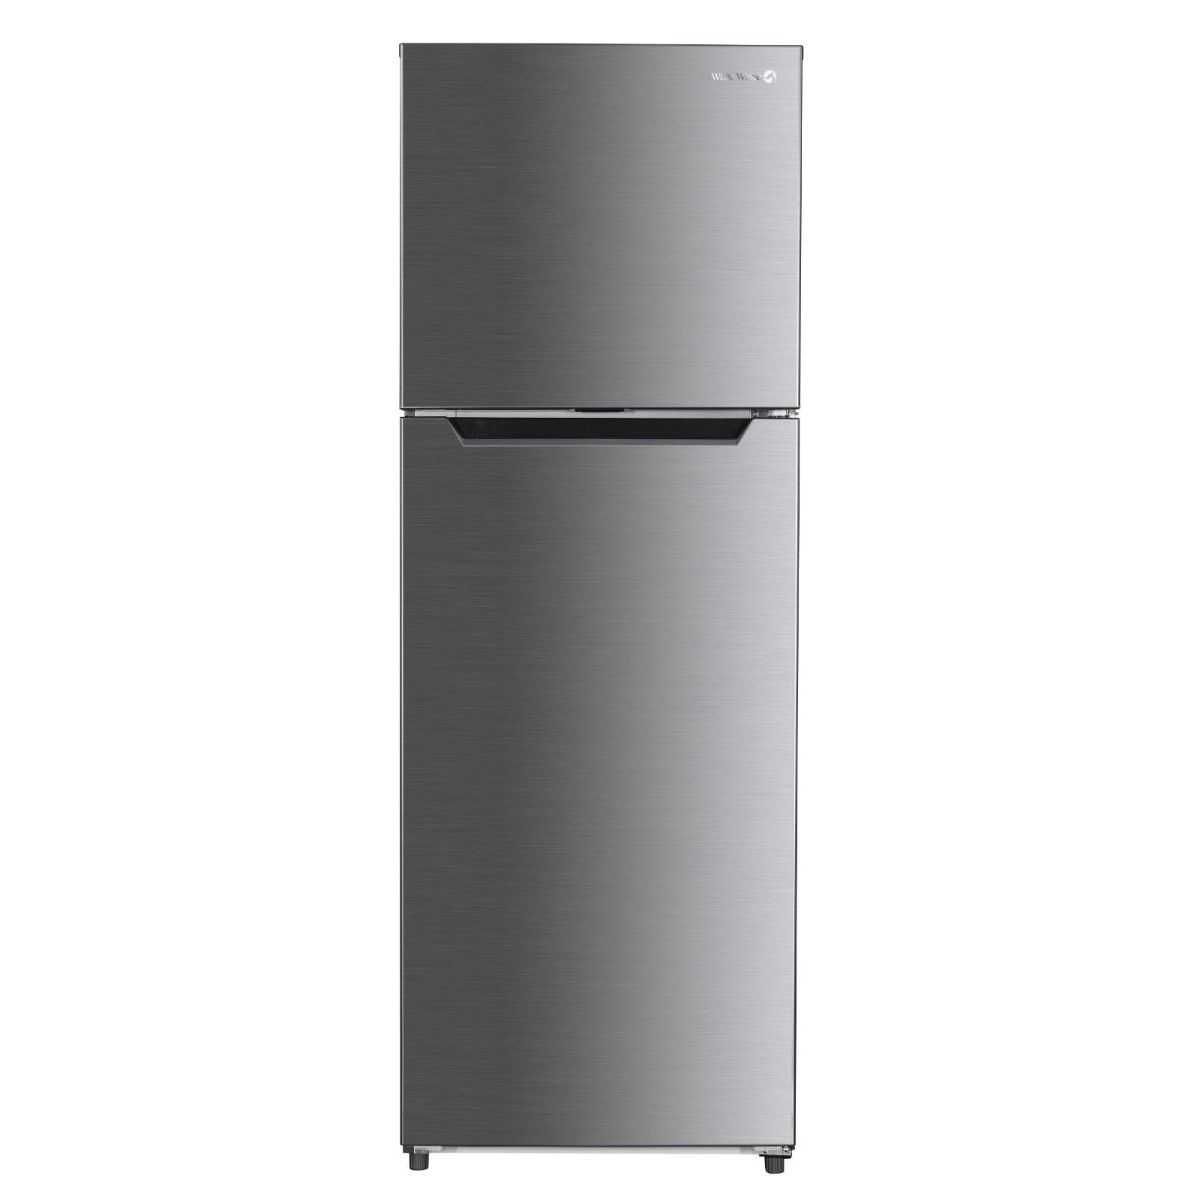 White Whale No Frost Refrigerator, 345 Liters, Silver - WR-3375 HSS